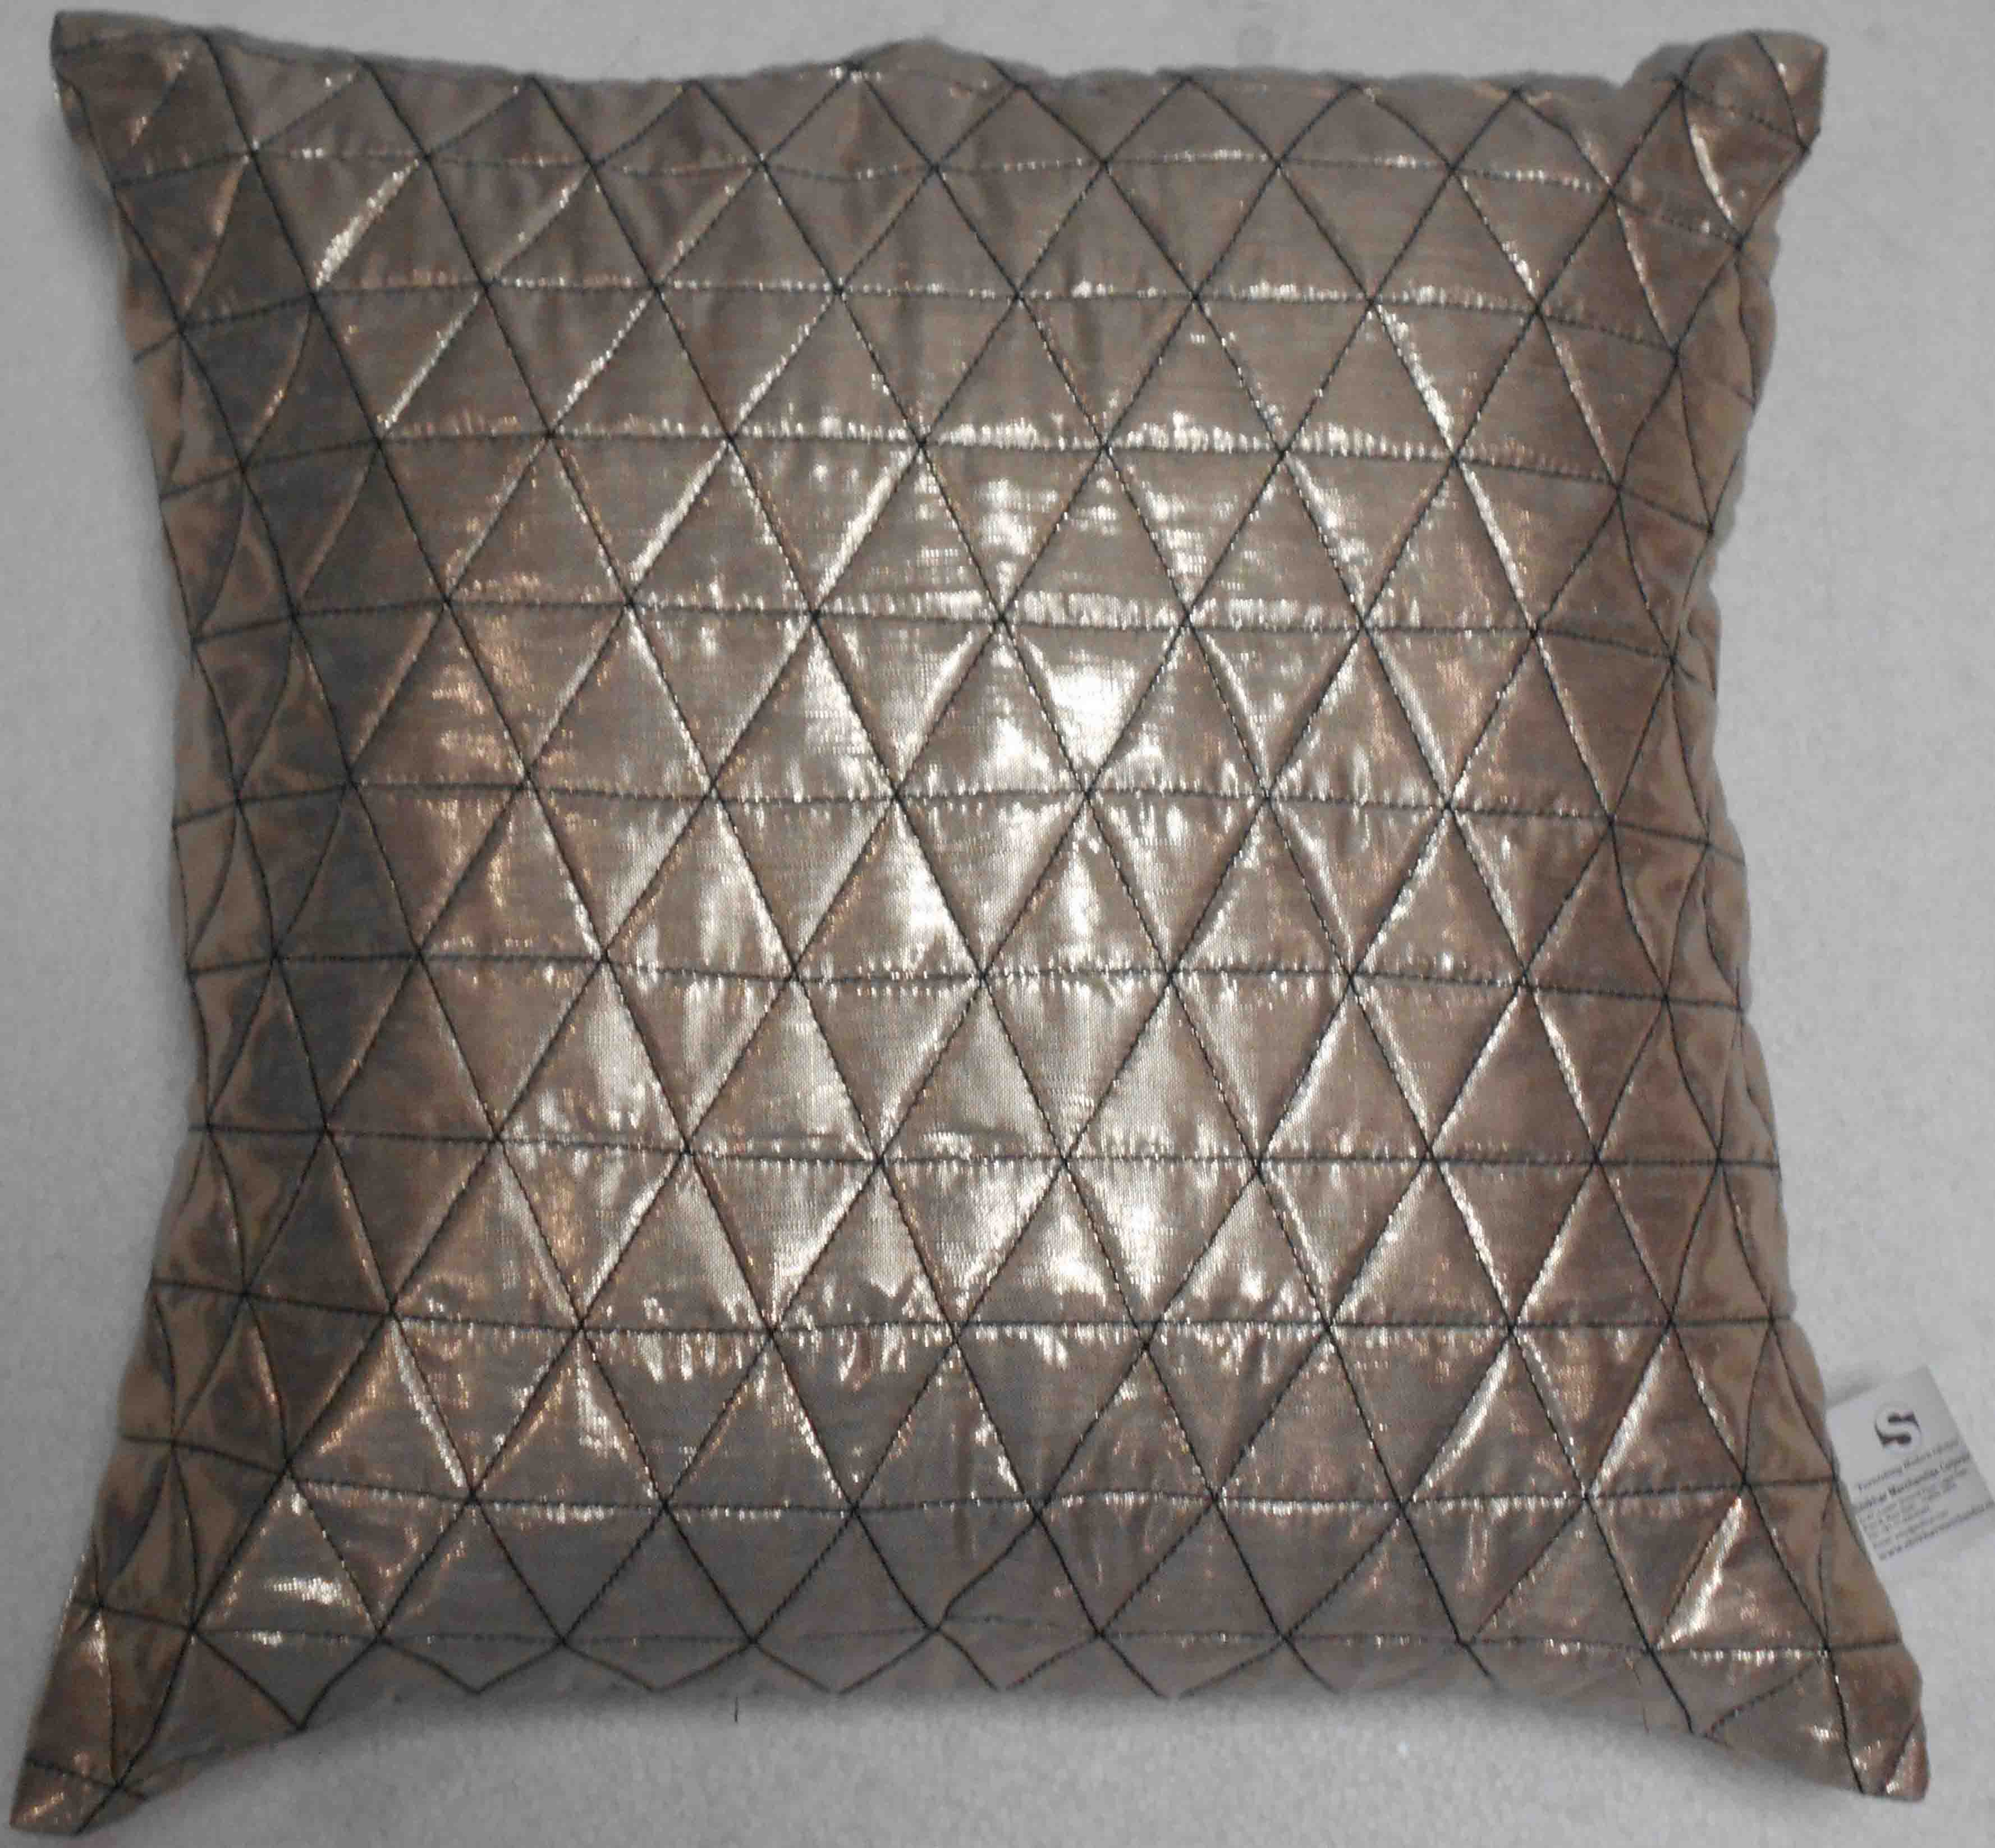 Quilted Cushion Cover